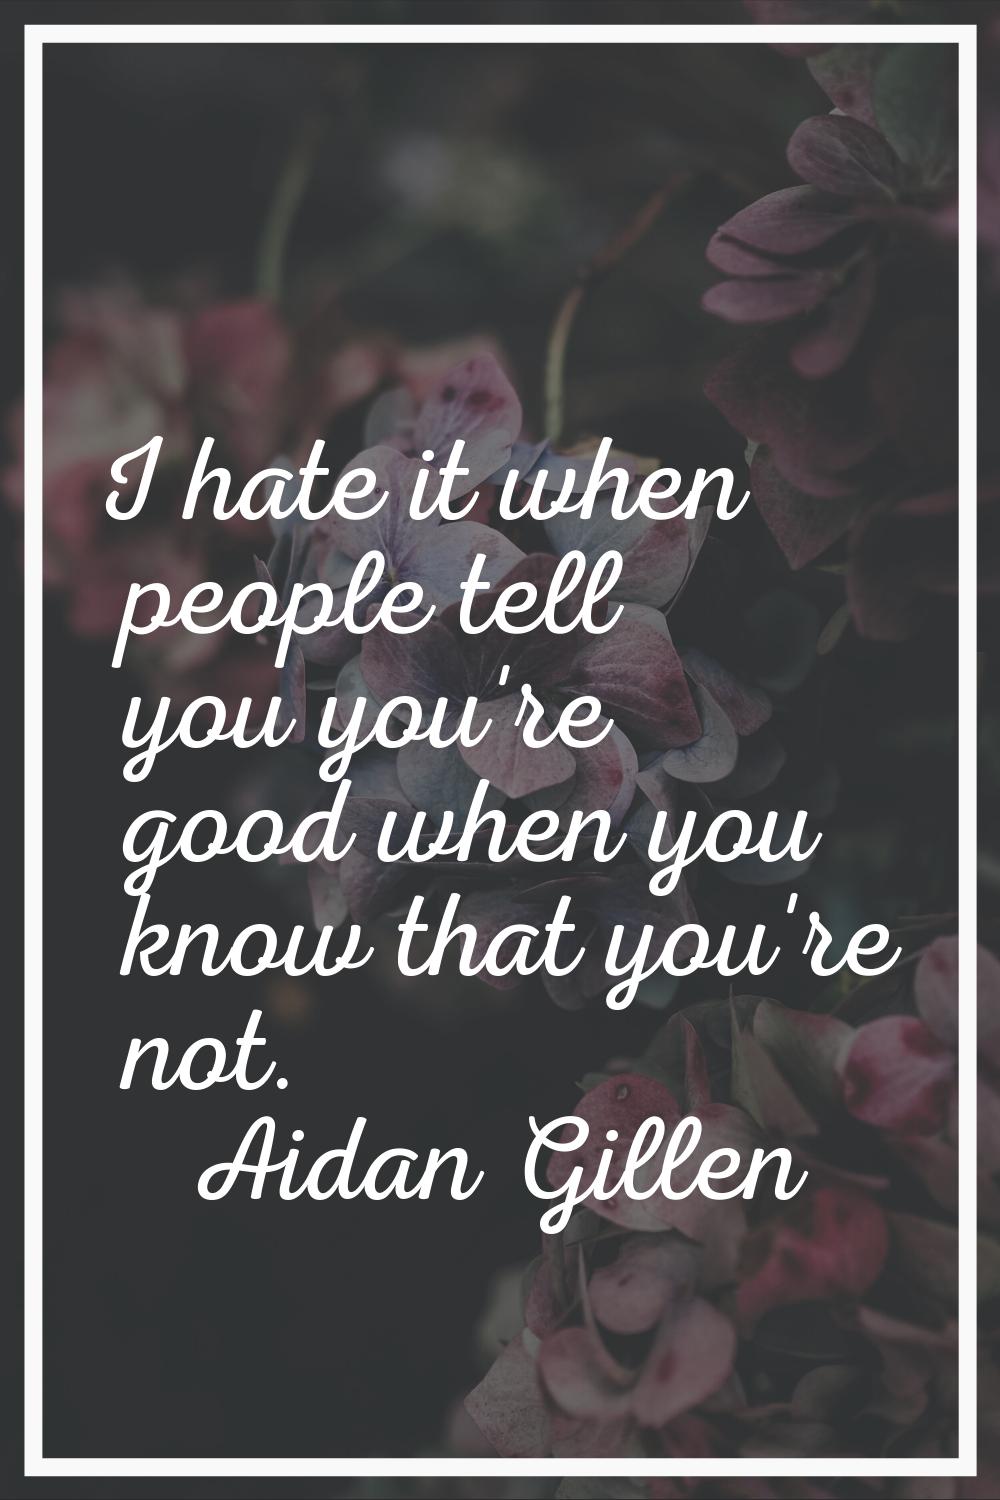 I hate it when people tell you you're good when you know that you're not.